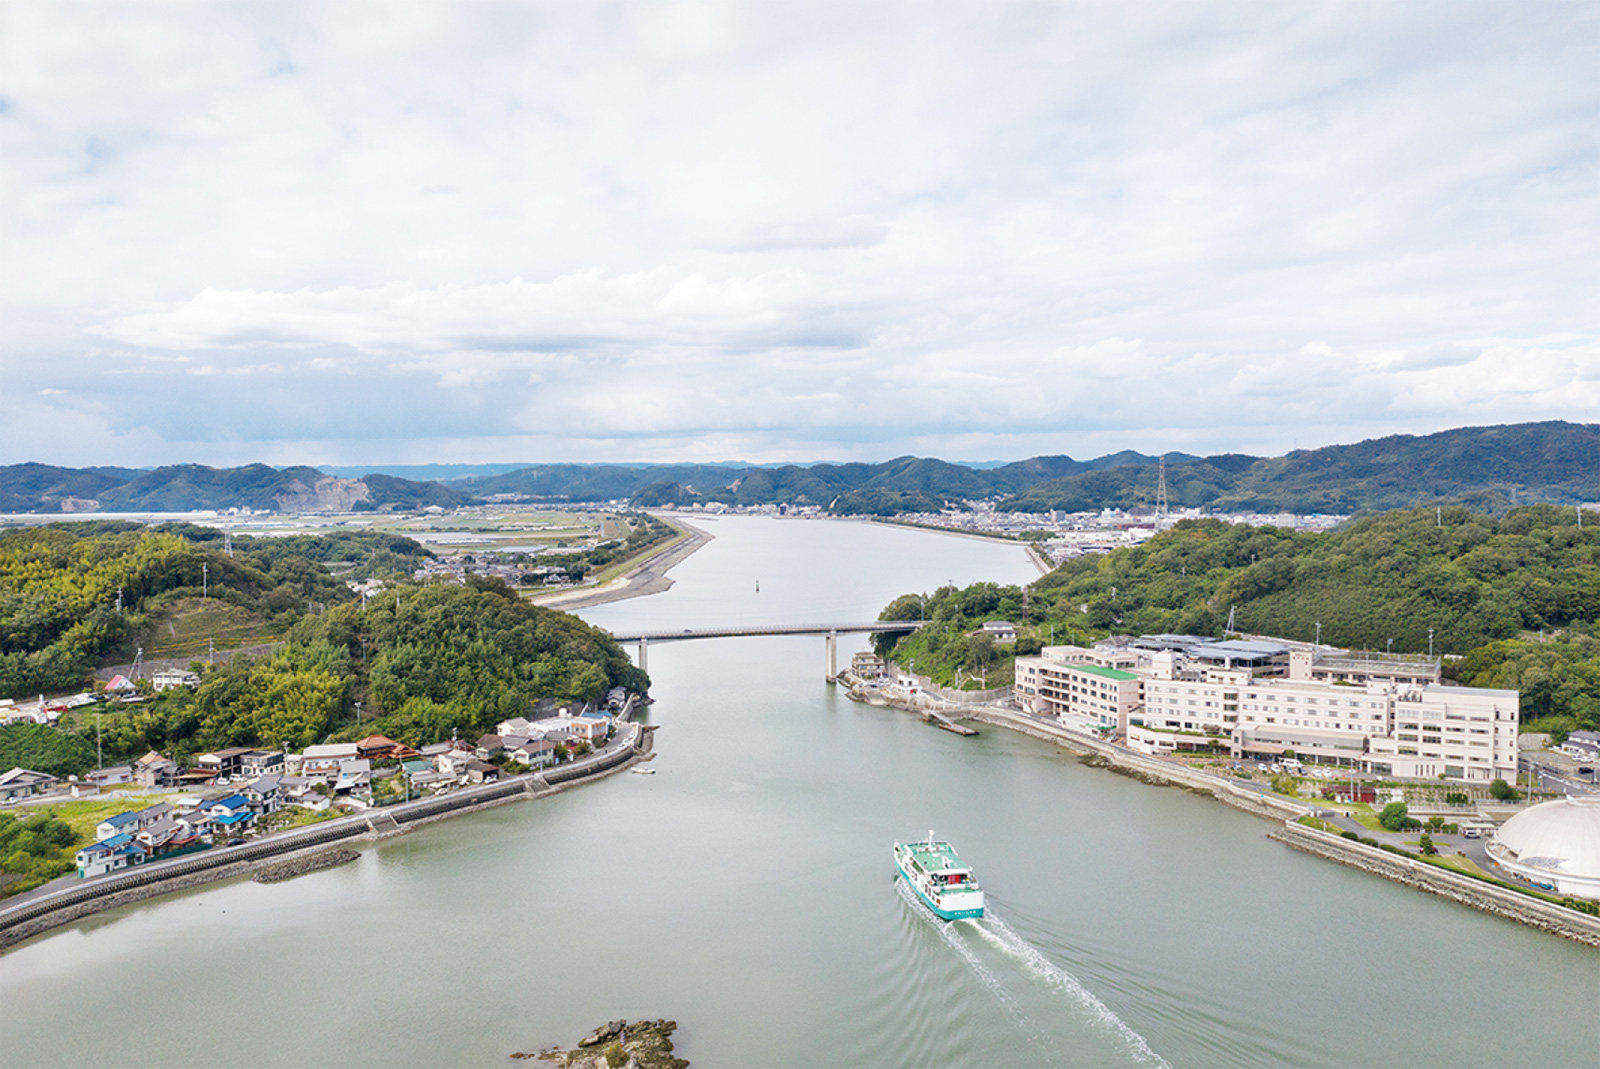 A short train ride from Hiroshima, the city of Kasaoka offers easy access to Japanʼs picturesque Inland Sea.